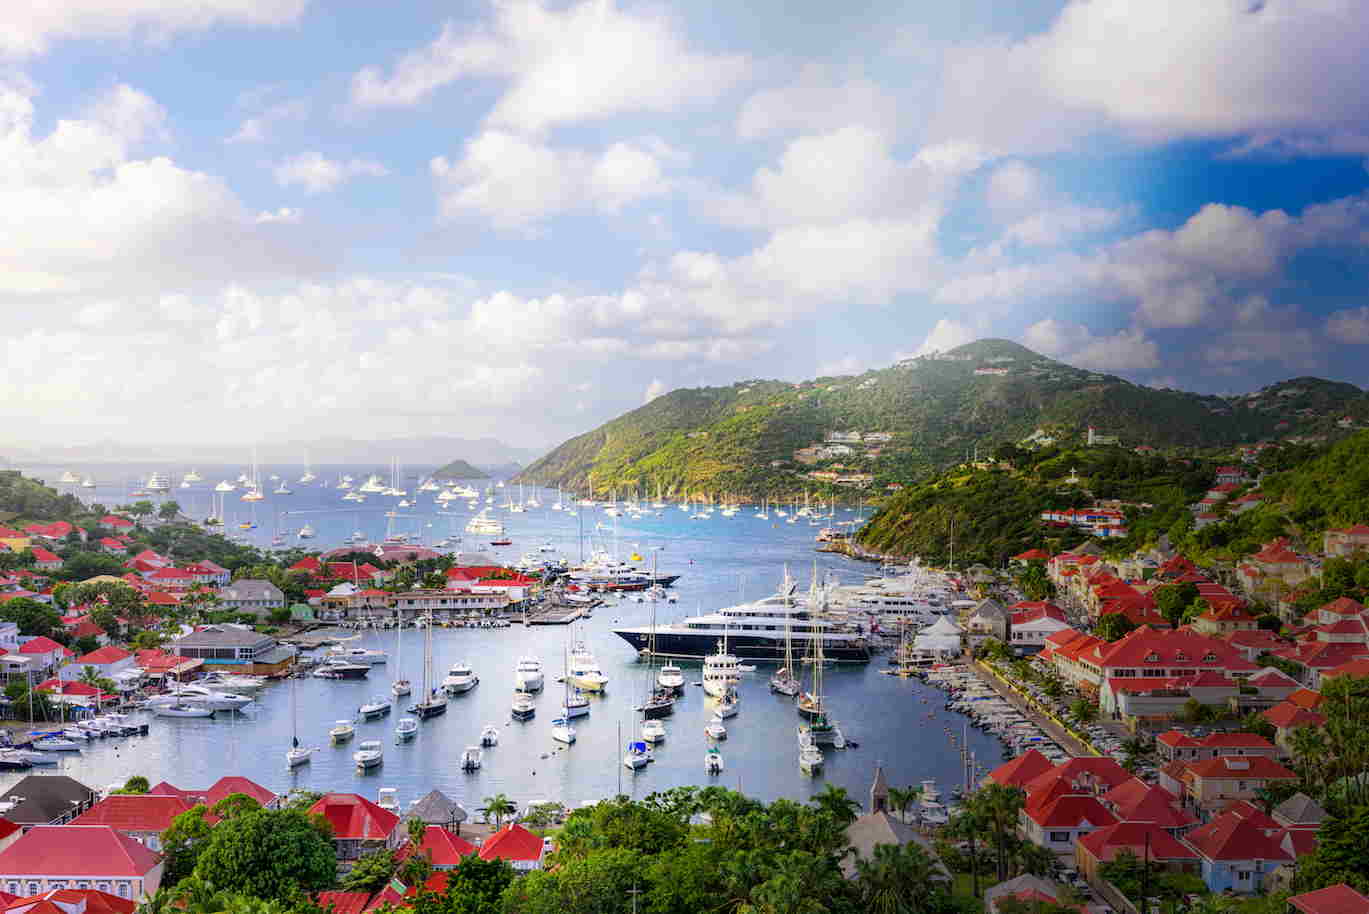 Visit St. Barthelemy: 2023 Travel Guide for St. Barthelemy, St